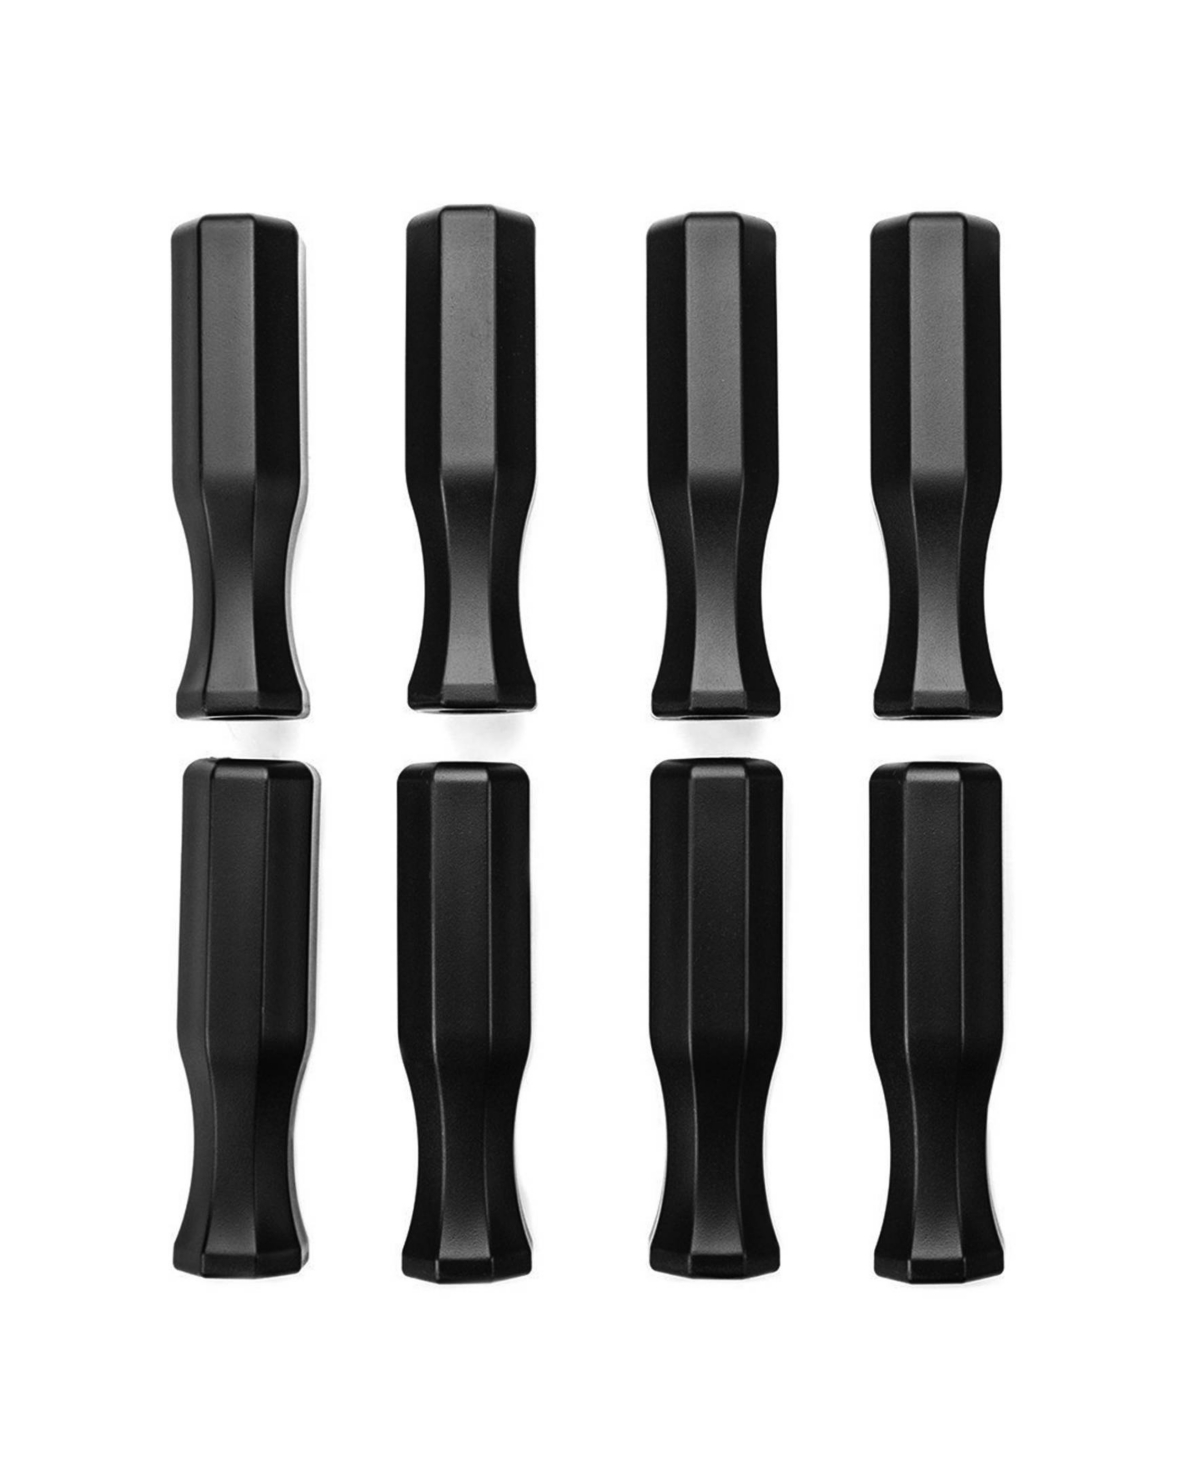 Blue Wave Replacement Handles For Standard Foosball Tables In Black